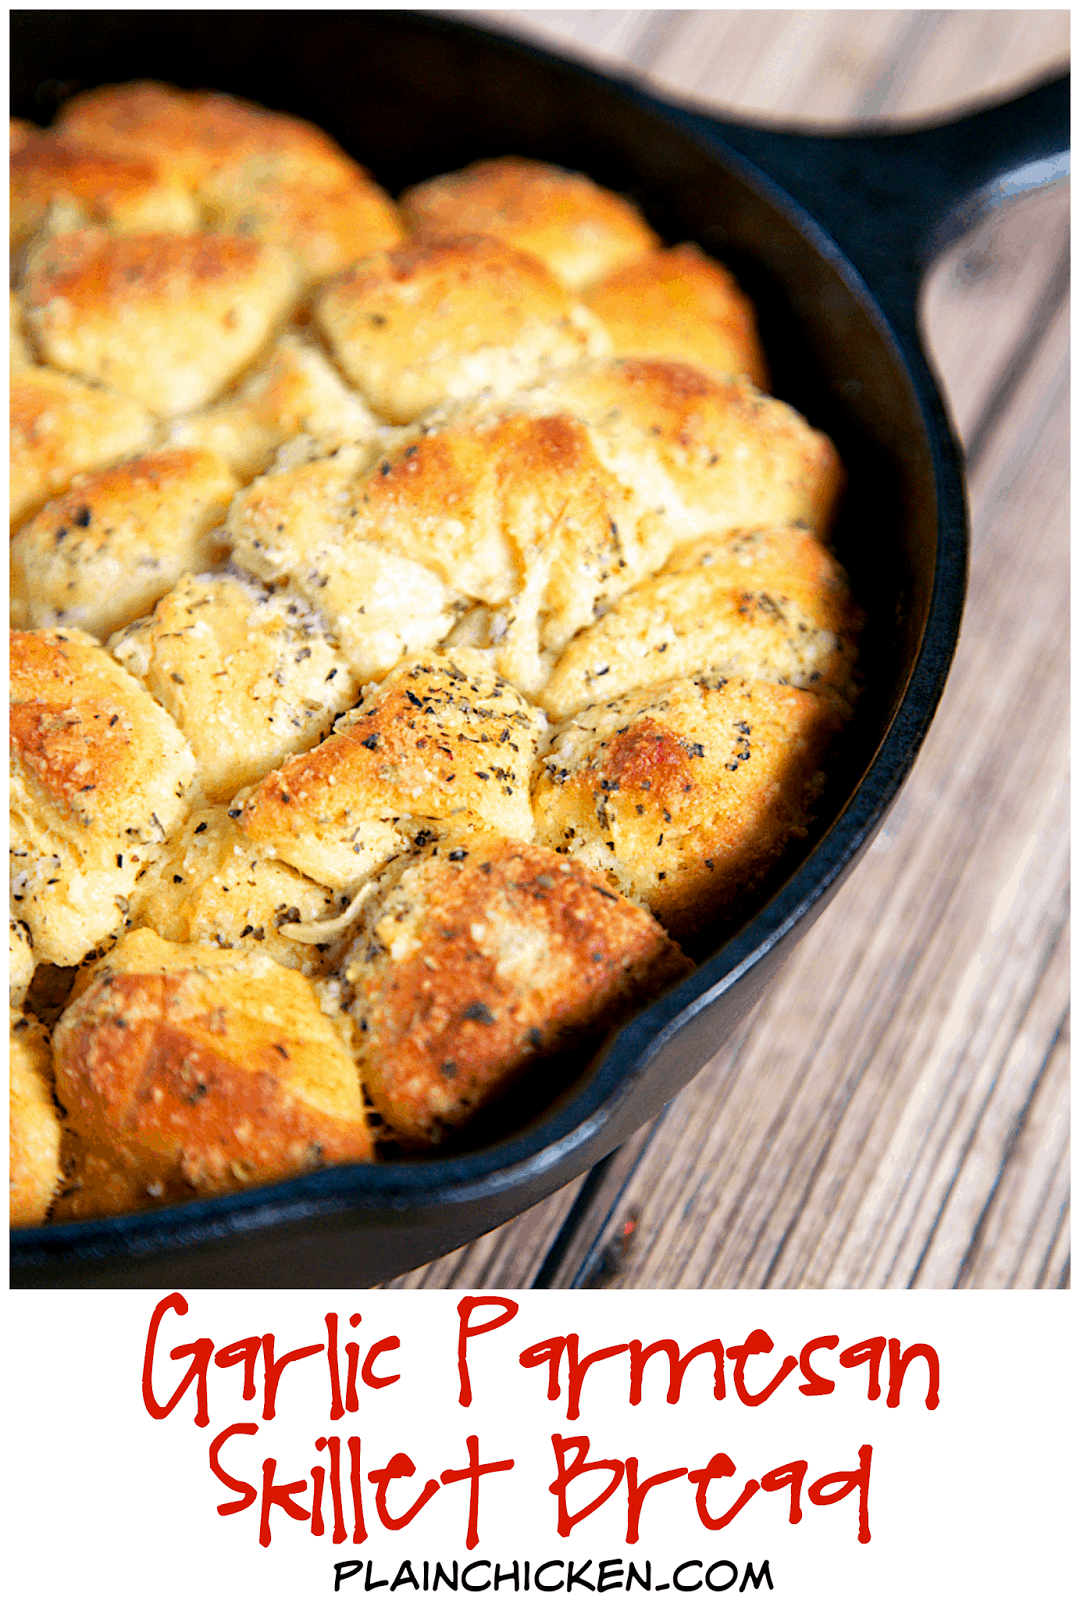 Garlic Parmesan Skillet Bread - refrigerated biscuits chopped and tossed in butter, garlic, italian seasoning and parmesan cheese. Baked in a small iron skillet. Great with pasta. Can also use as an appetizer with some warm pizza sauce. YUM!! I can make a meal out of this yummy bread!